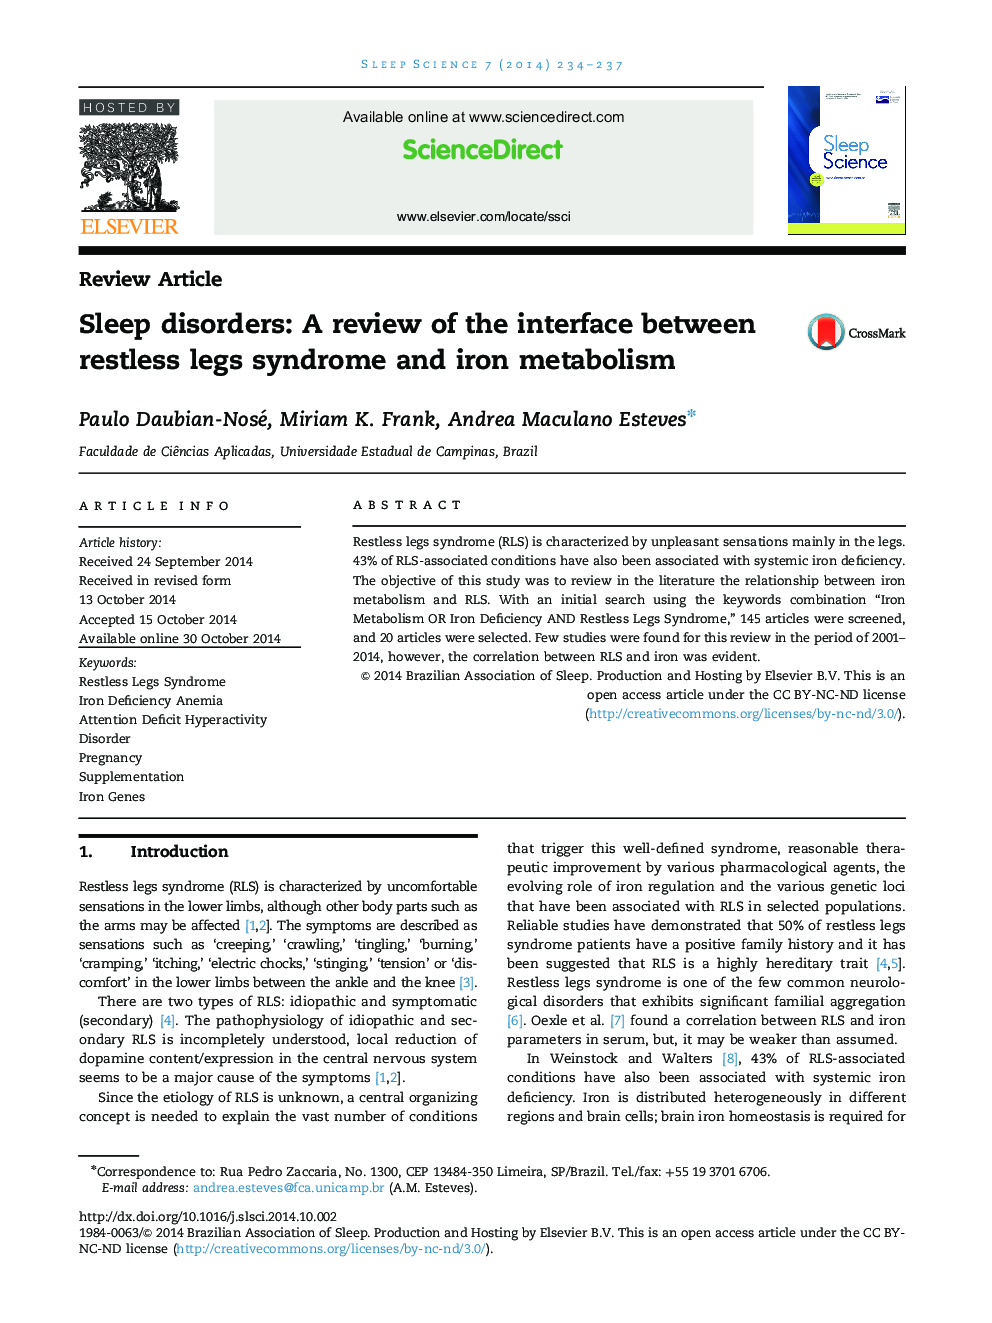 Sleep disorders: A review of the interface between restless legs syndrome and iron metabolism